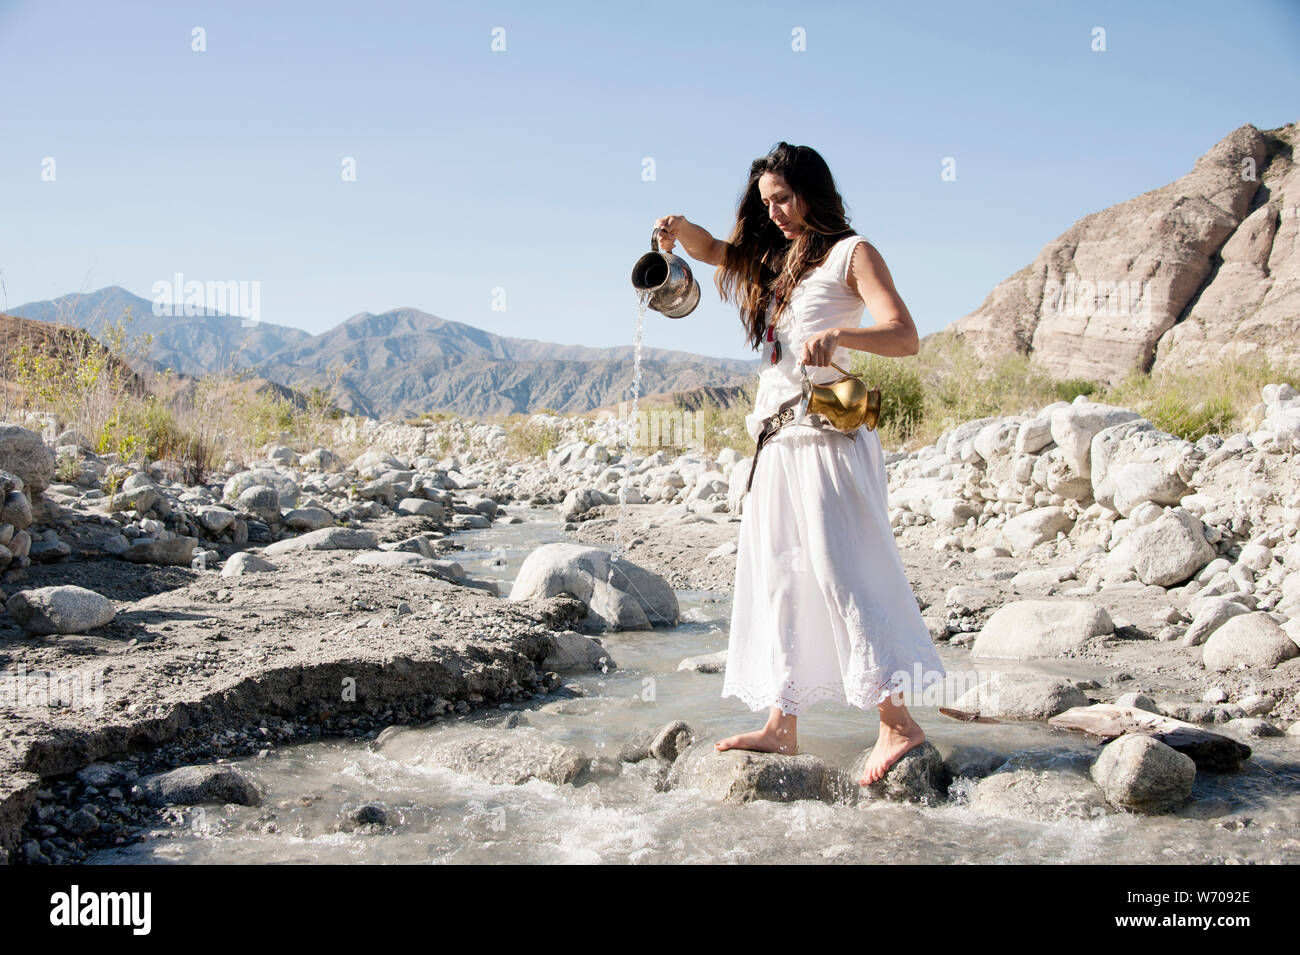 THE STAR Tarot water woman pouring from two pitchers into a wild river. You are will find yourself inspired when the Star card appears. Stock Photo